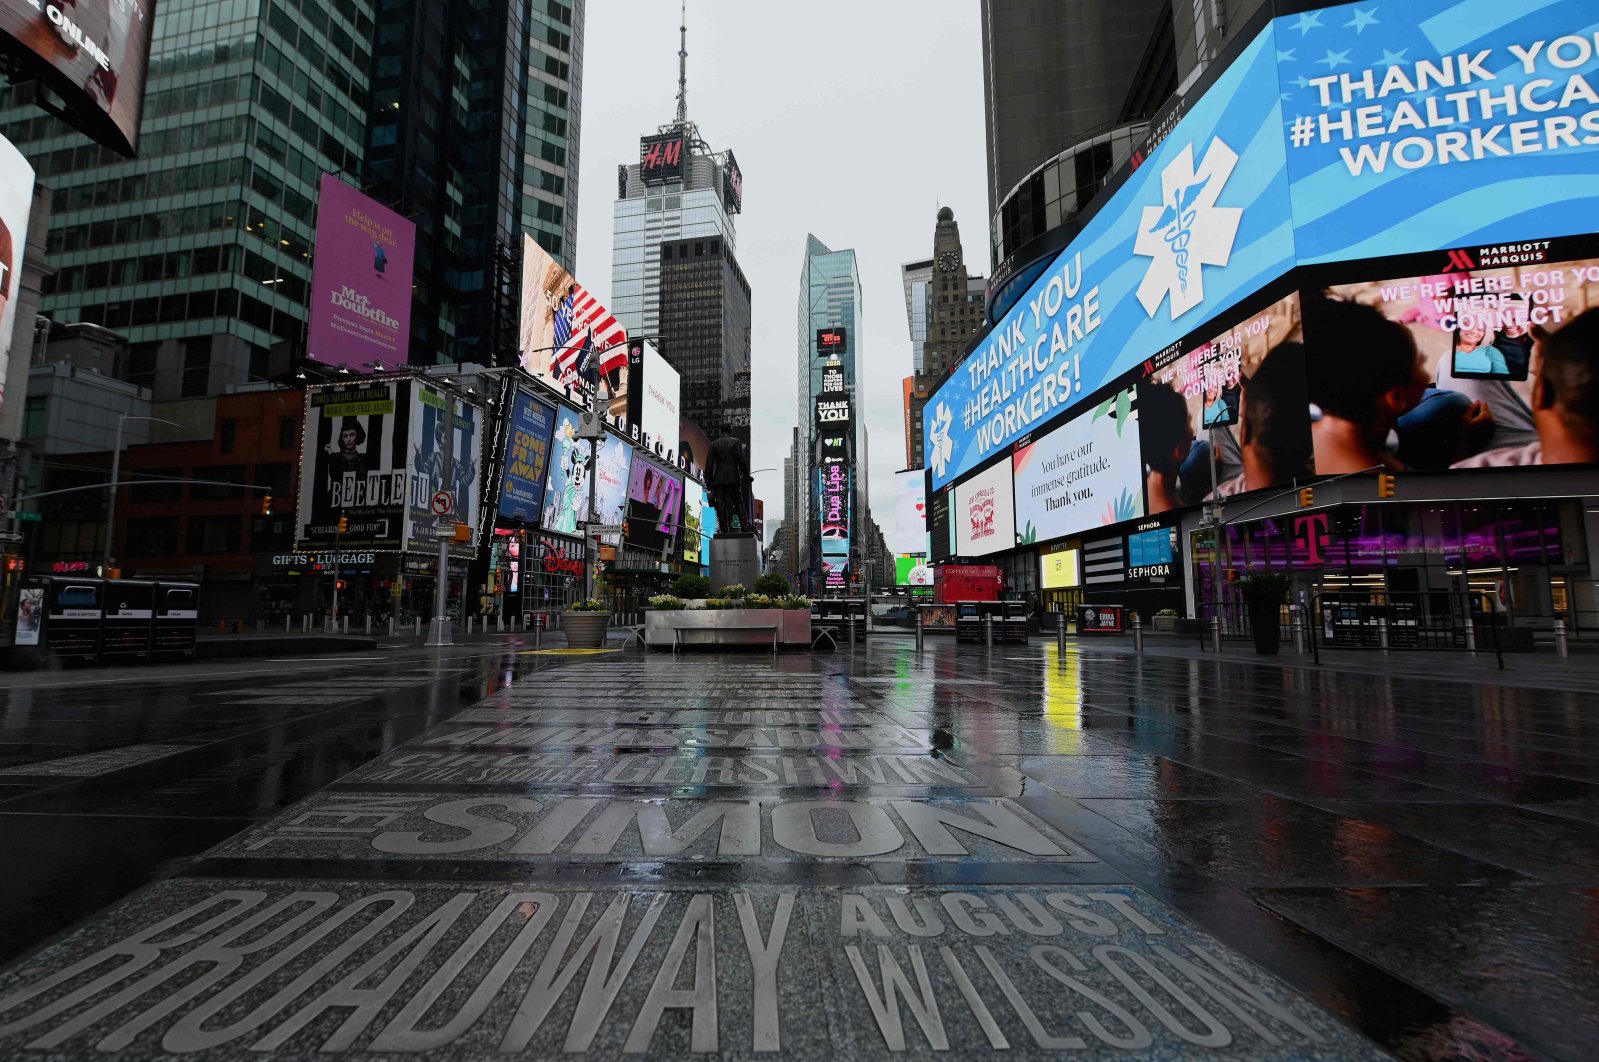 A view of a nearly empty Time Square on April 09, 2020 in New York City, as another 6.6 million US workers file for unemployment benefits for the week ending April 4, 2020. (AFP Photo)